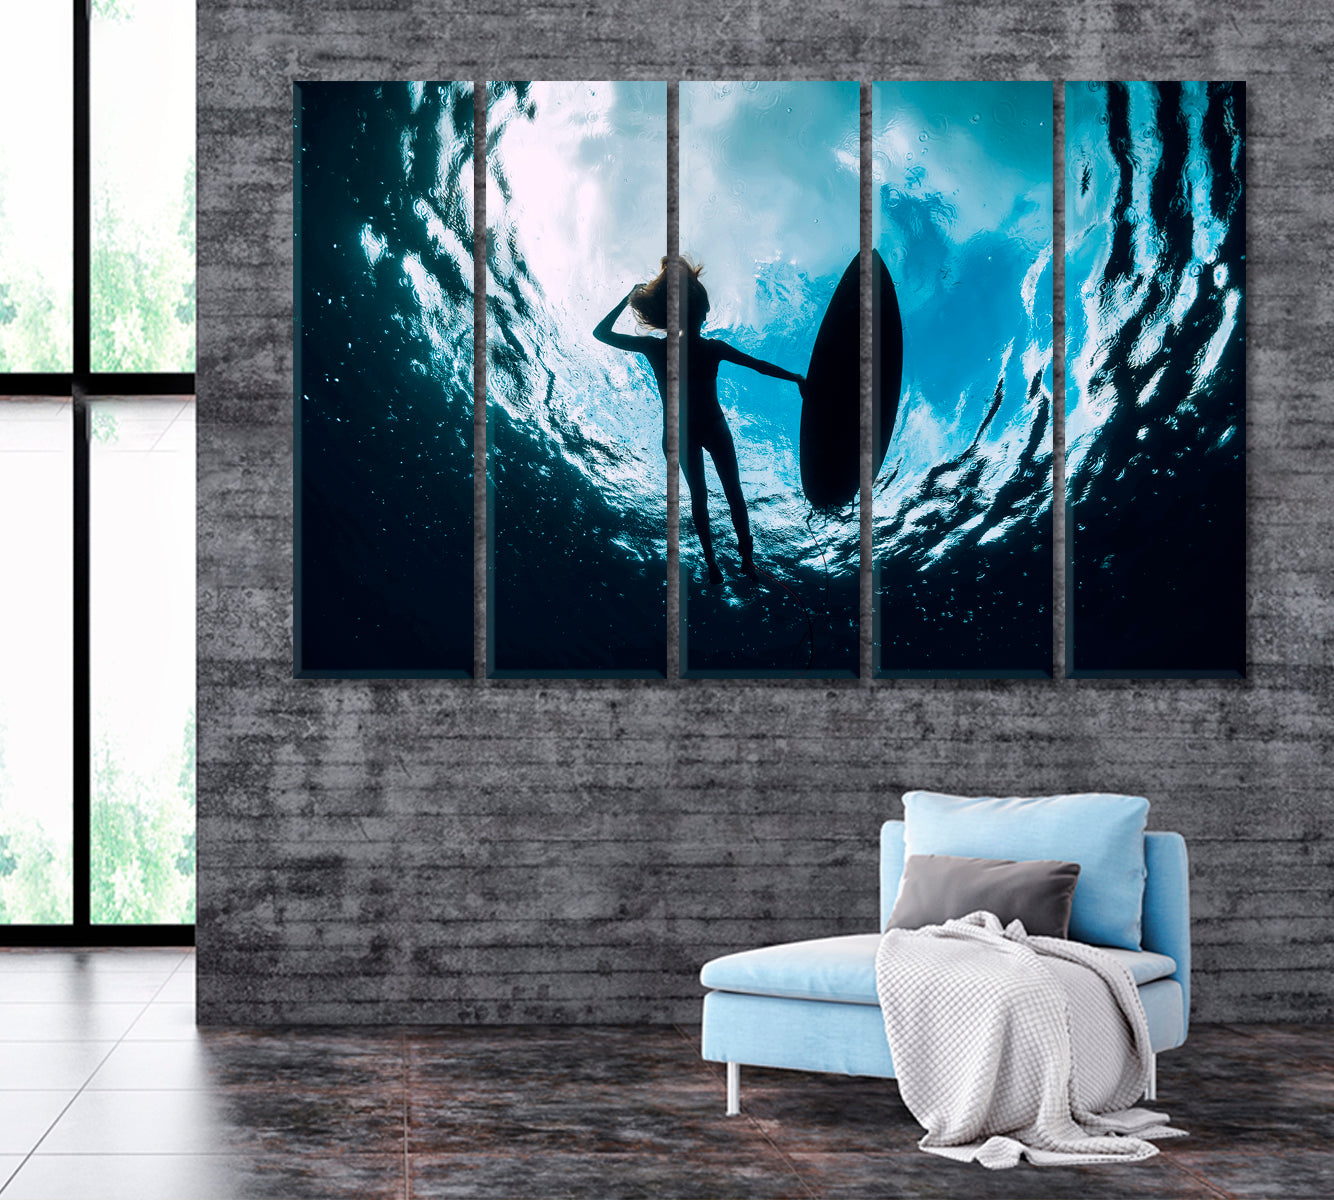 Surfer Woman Silhouette with Surfboard Canvas Print ArtLexy 5 Panels 36"x24" inches 